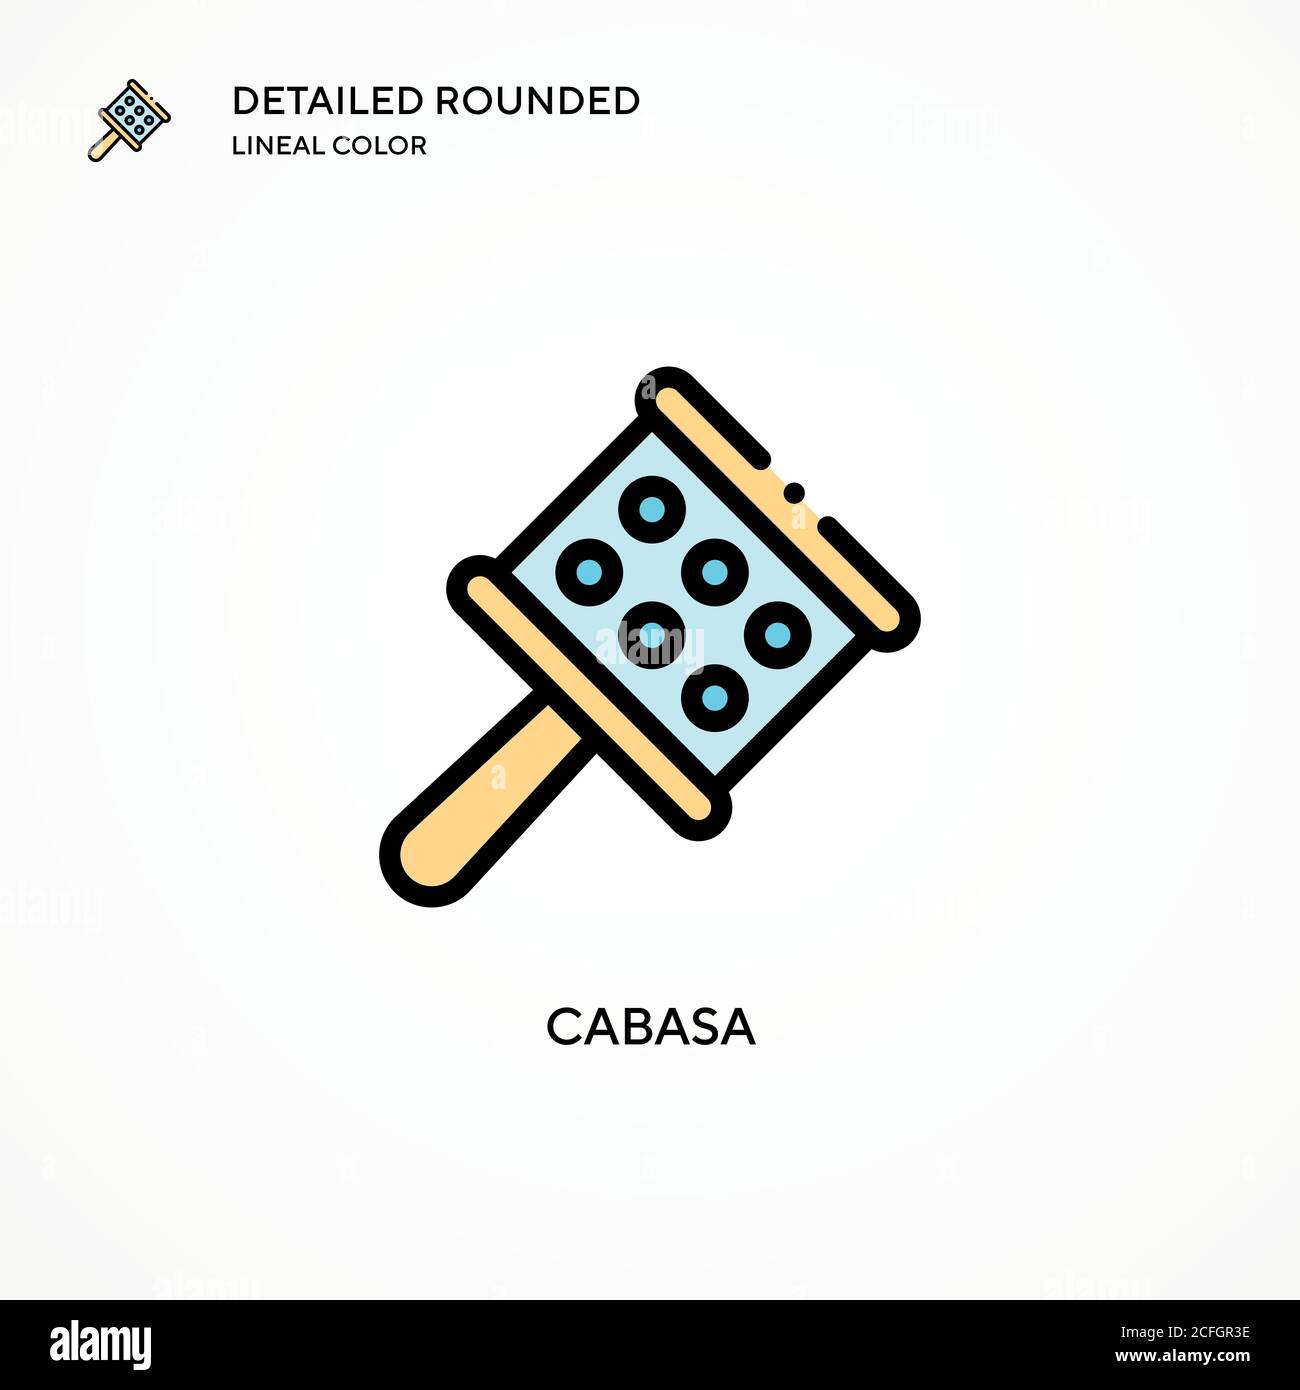 Cabasa vector icon. Modern vector illustration concepts. Easy to edit and customize. Stock Vector